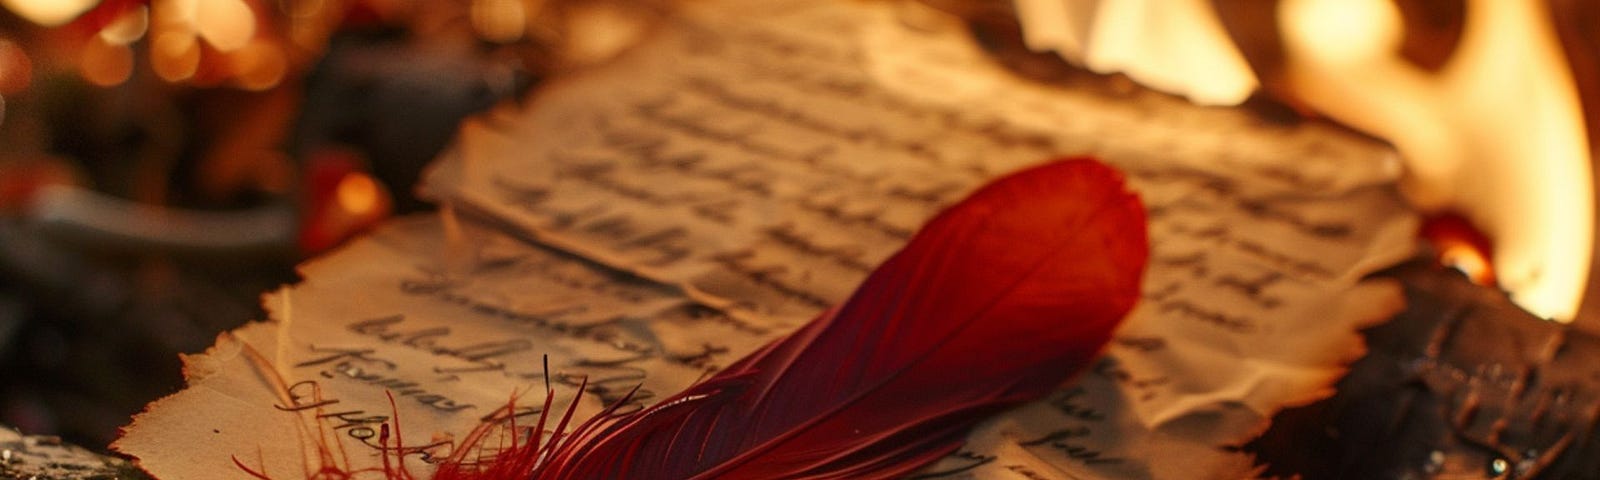 A red feather lies on a burnt manuscript surrounded by flames, evoking a dramatic scene of destroyed writings.